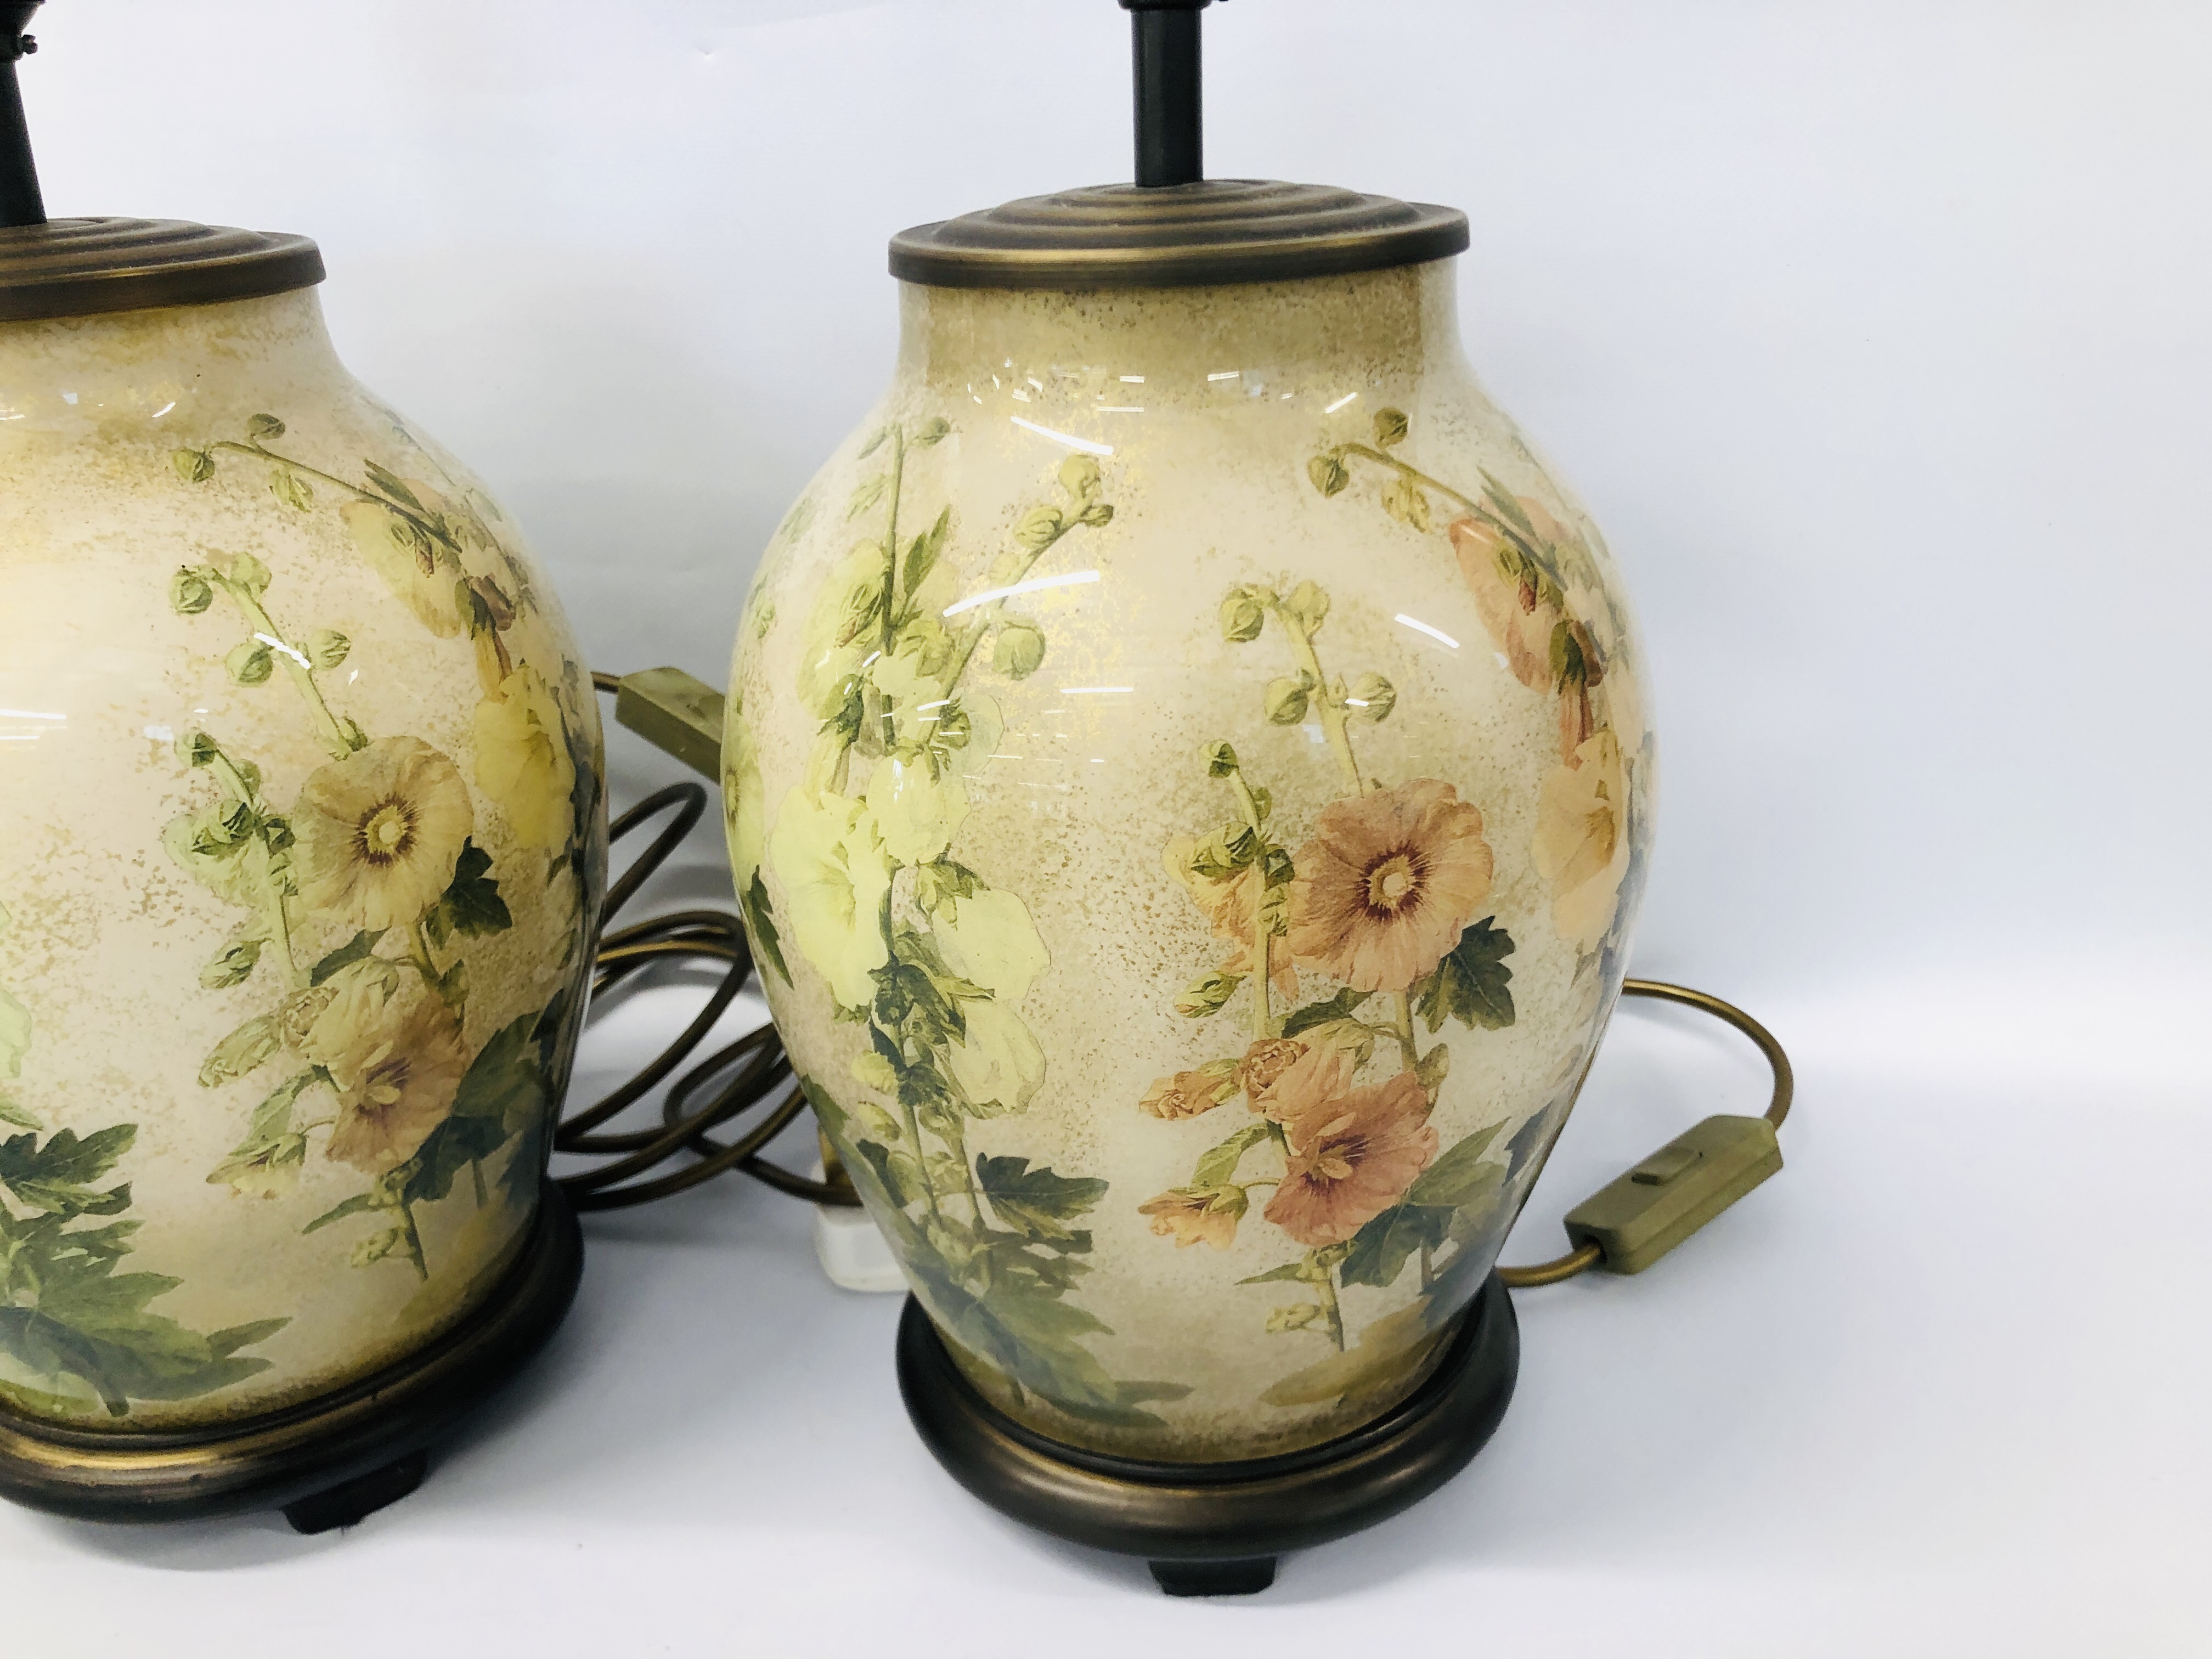 PAIR OF DESIGNER GLASS FLORAL PATTERN LAMP BASES + ONE OTHER H 28CM - SOLD AS SEEN. - Image 2 of 5